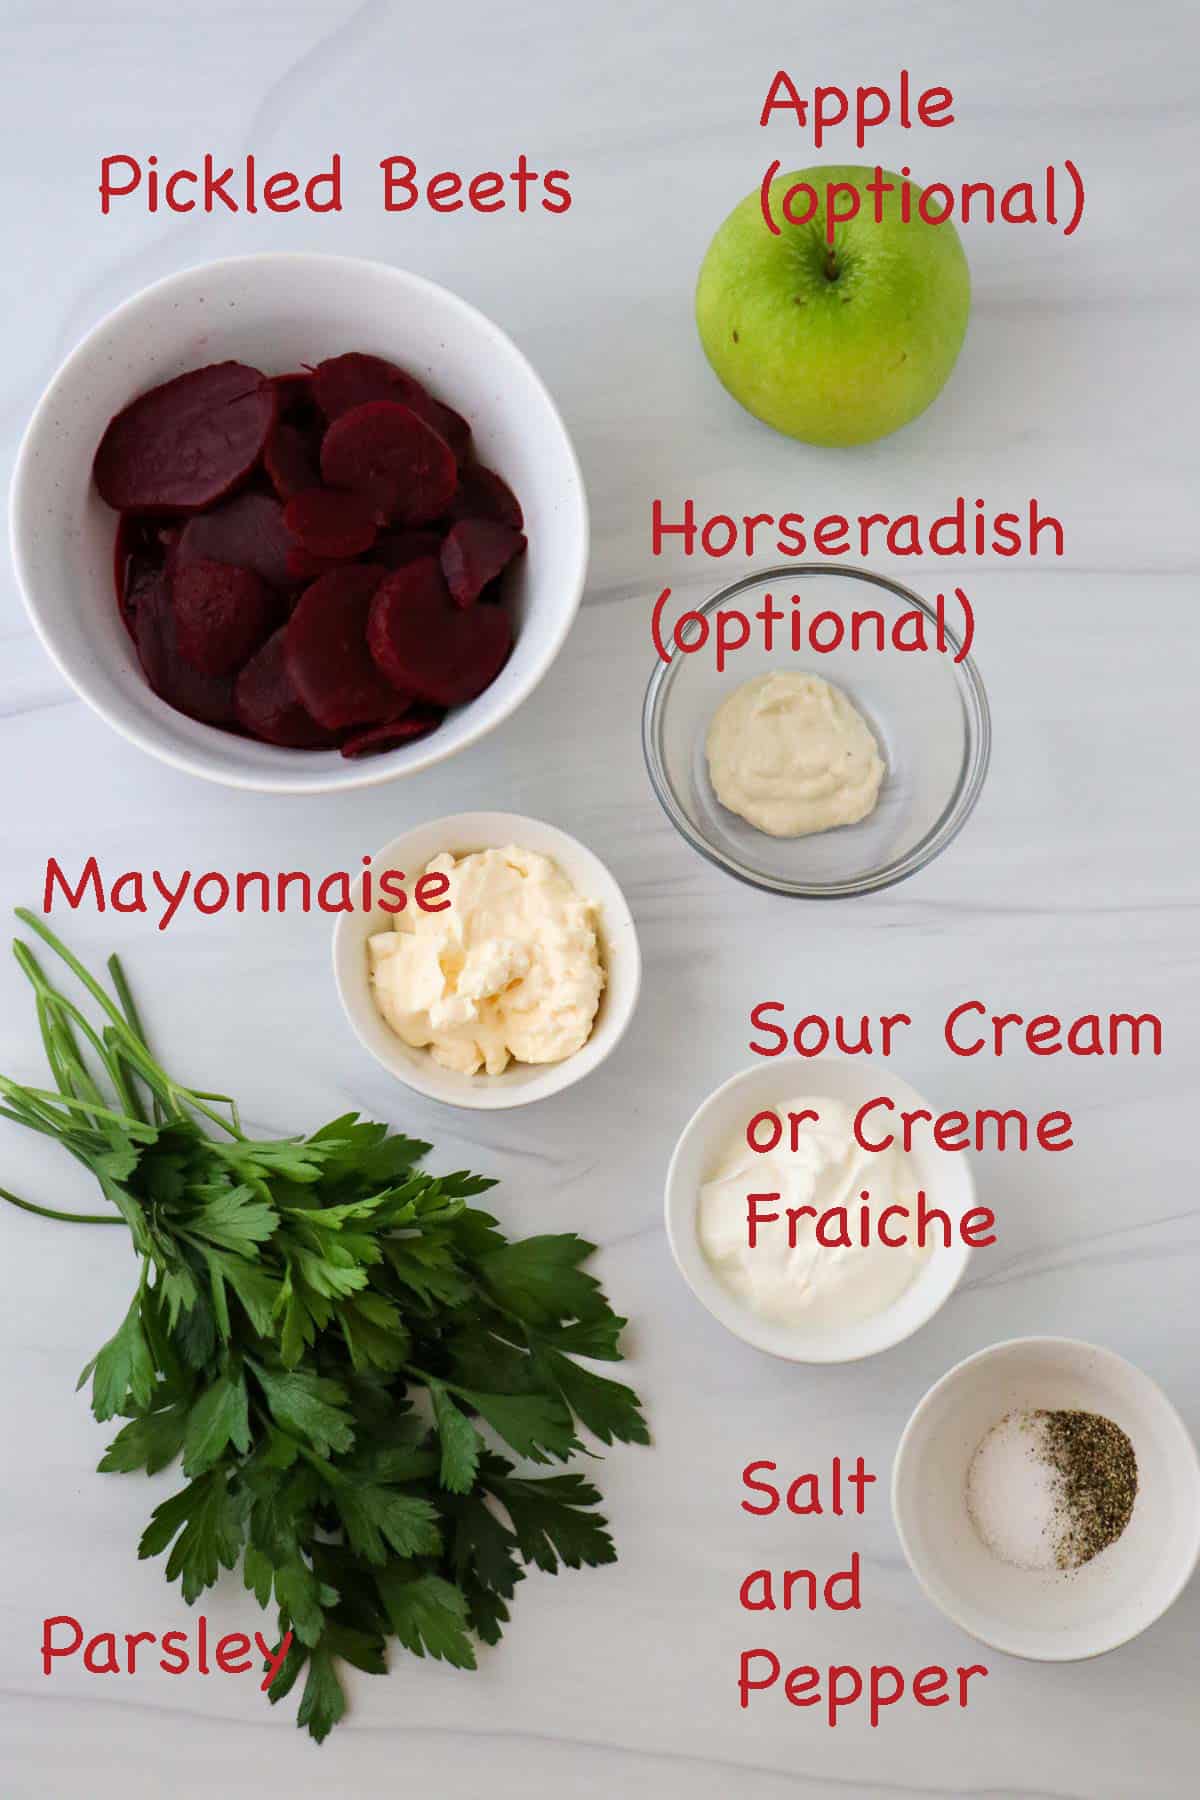 Labeled ingredients for Swedish Beet Salad.